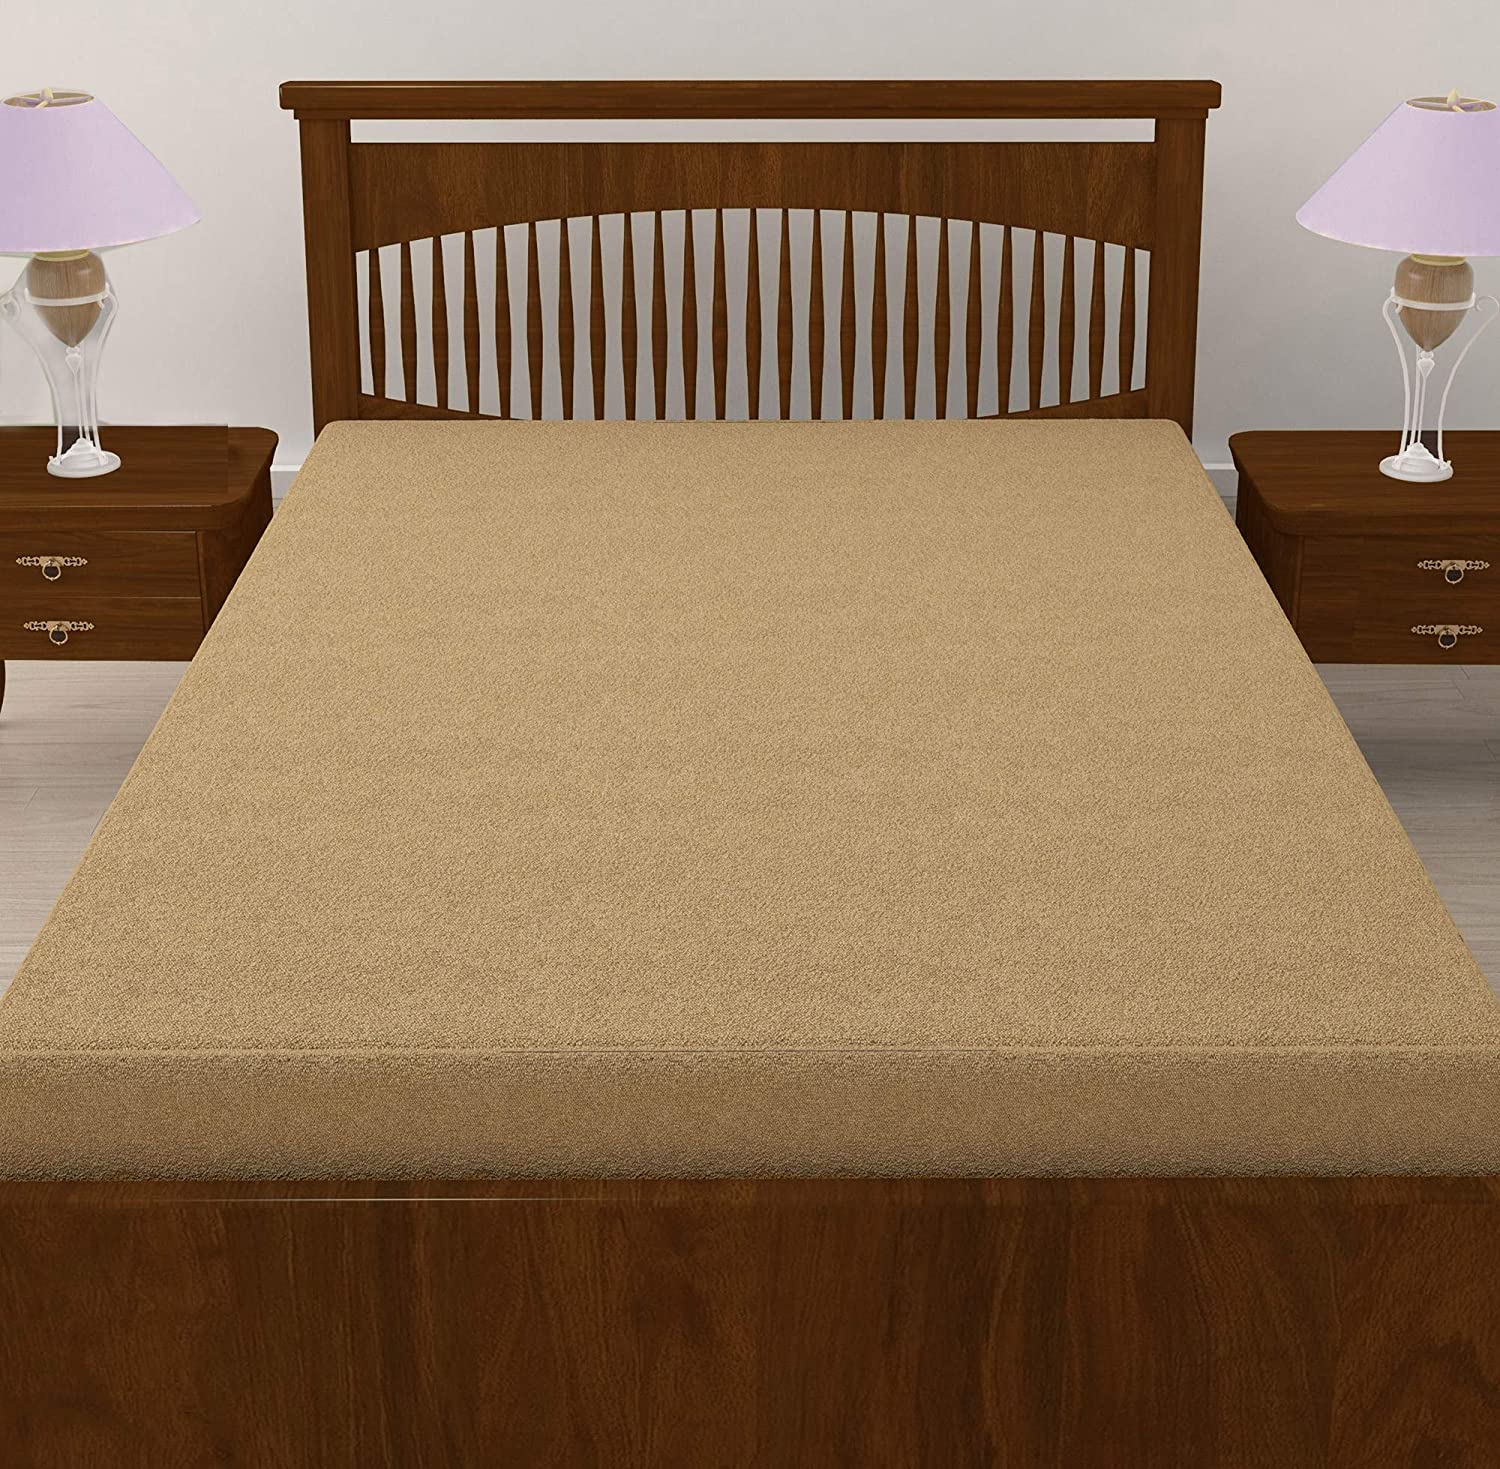 100% Waterproof Terry Cotton Fitted Mattress Protector for King Size Bed (78 x 72 Inch, Beige)